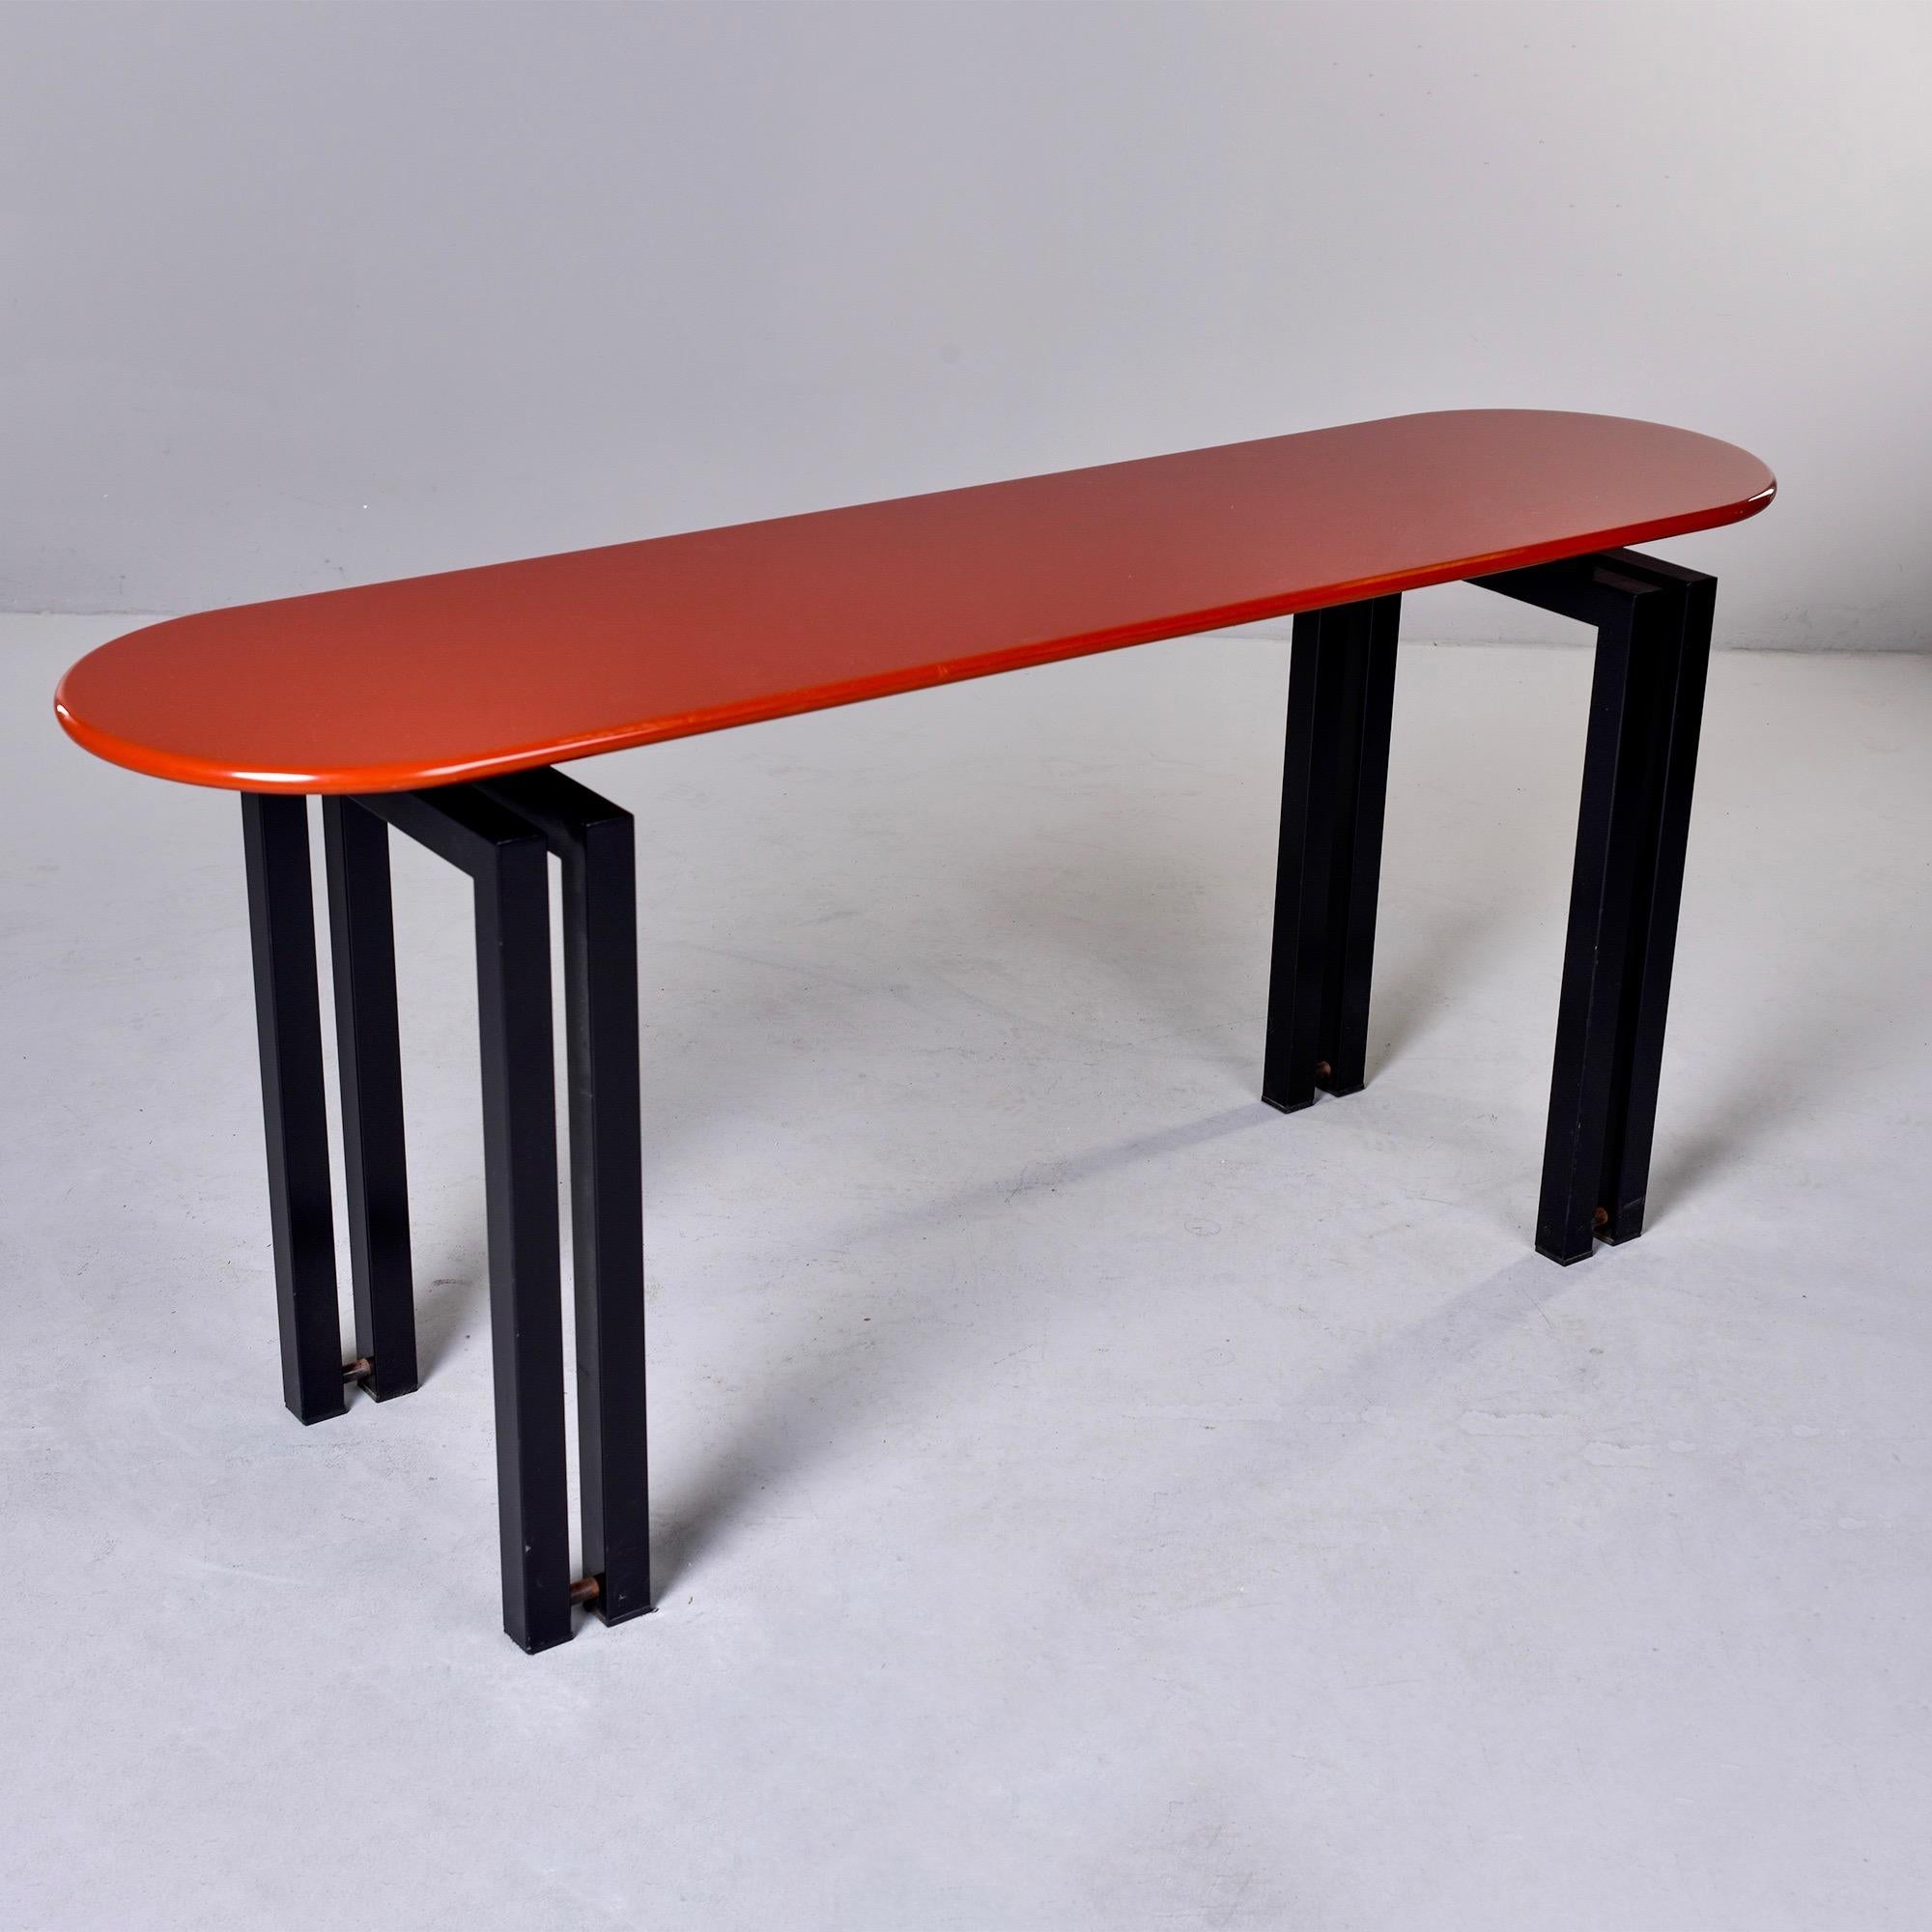 Circa 1980s console by Cidue of Italy features an oval table top with a cinnabar color lacquered top and contrasting black metal base / legs. Marked with maker’s tag on underside of top.